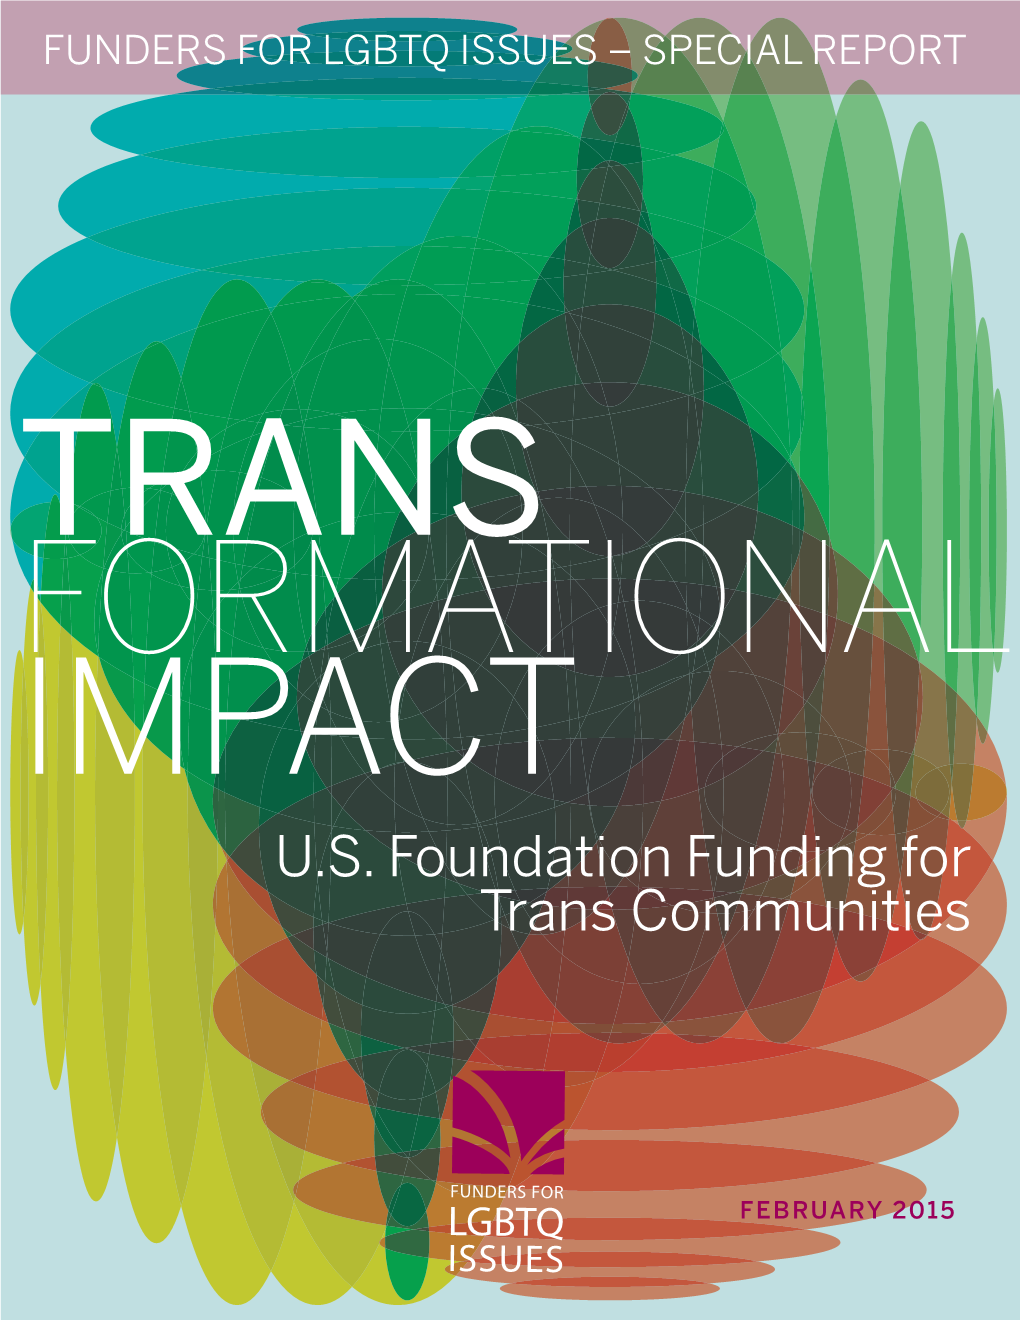 Transformational Impact: U.S. Foundation Funding for Trans